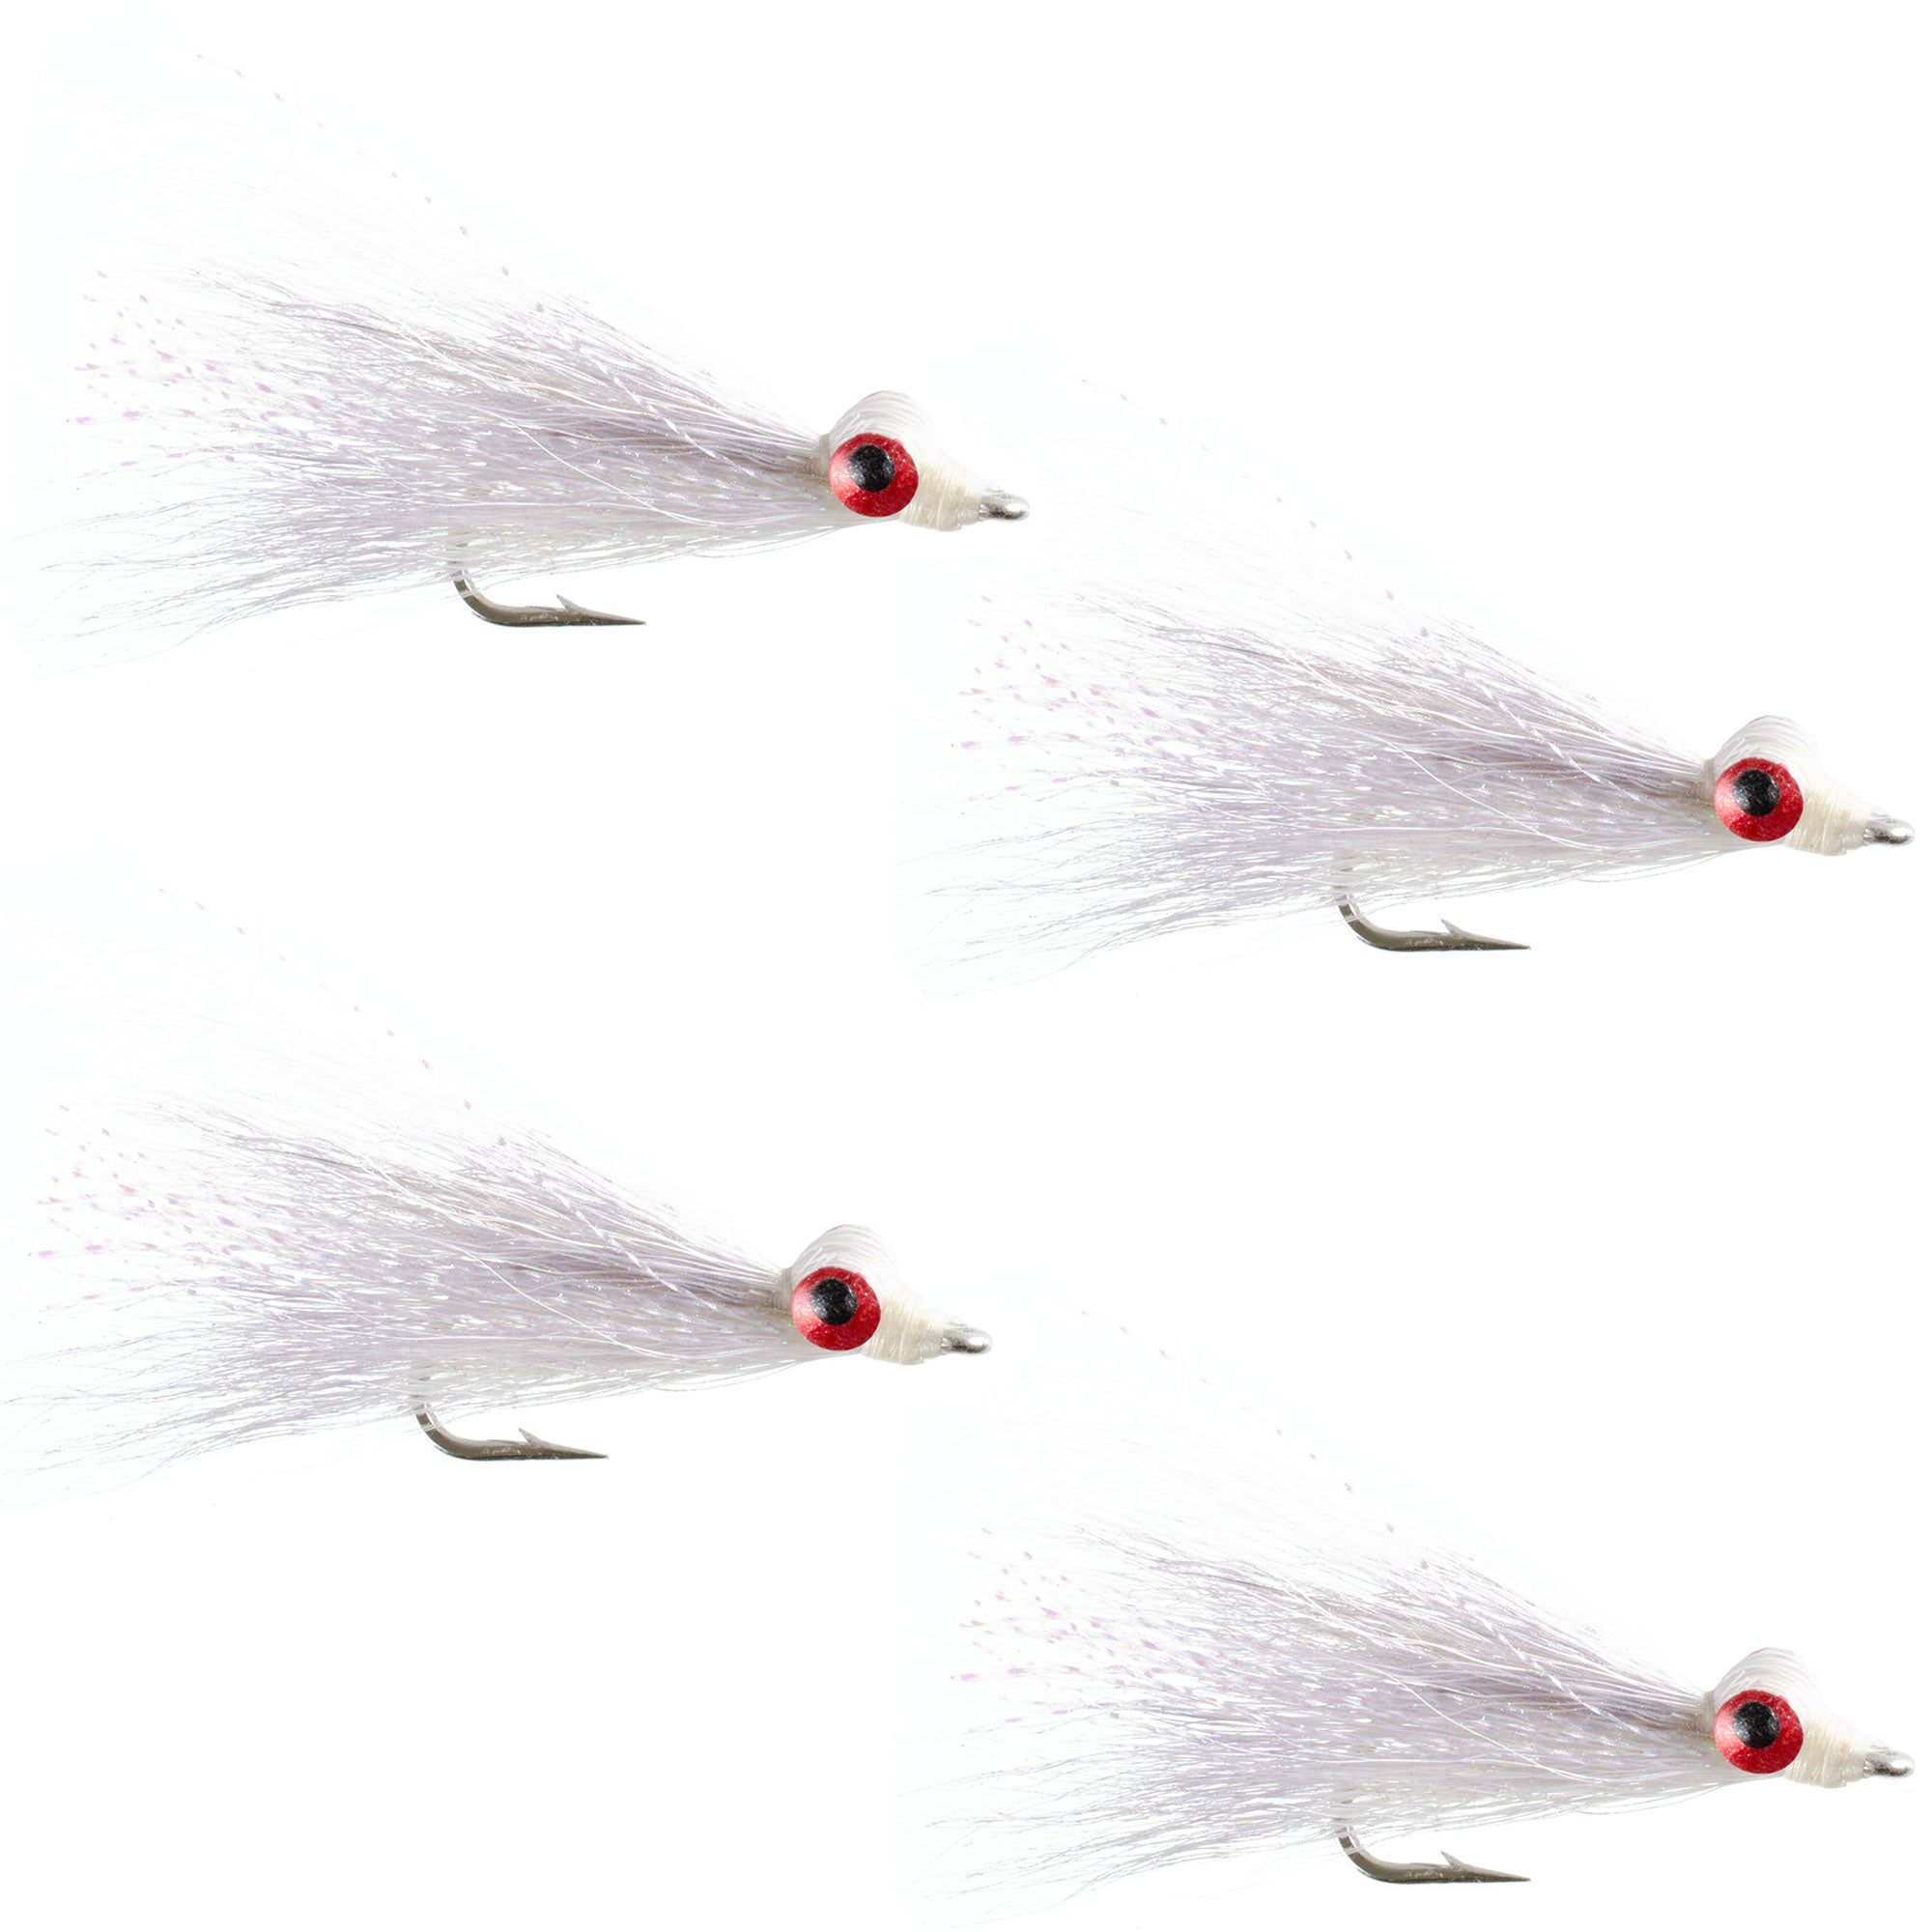 Clousers Deep Minnow White - Streamer Fly Fishing Flies - 4 Saltwater